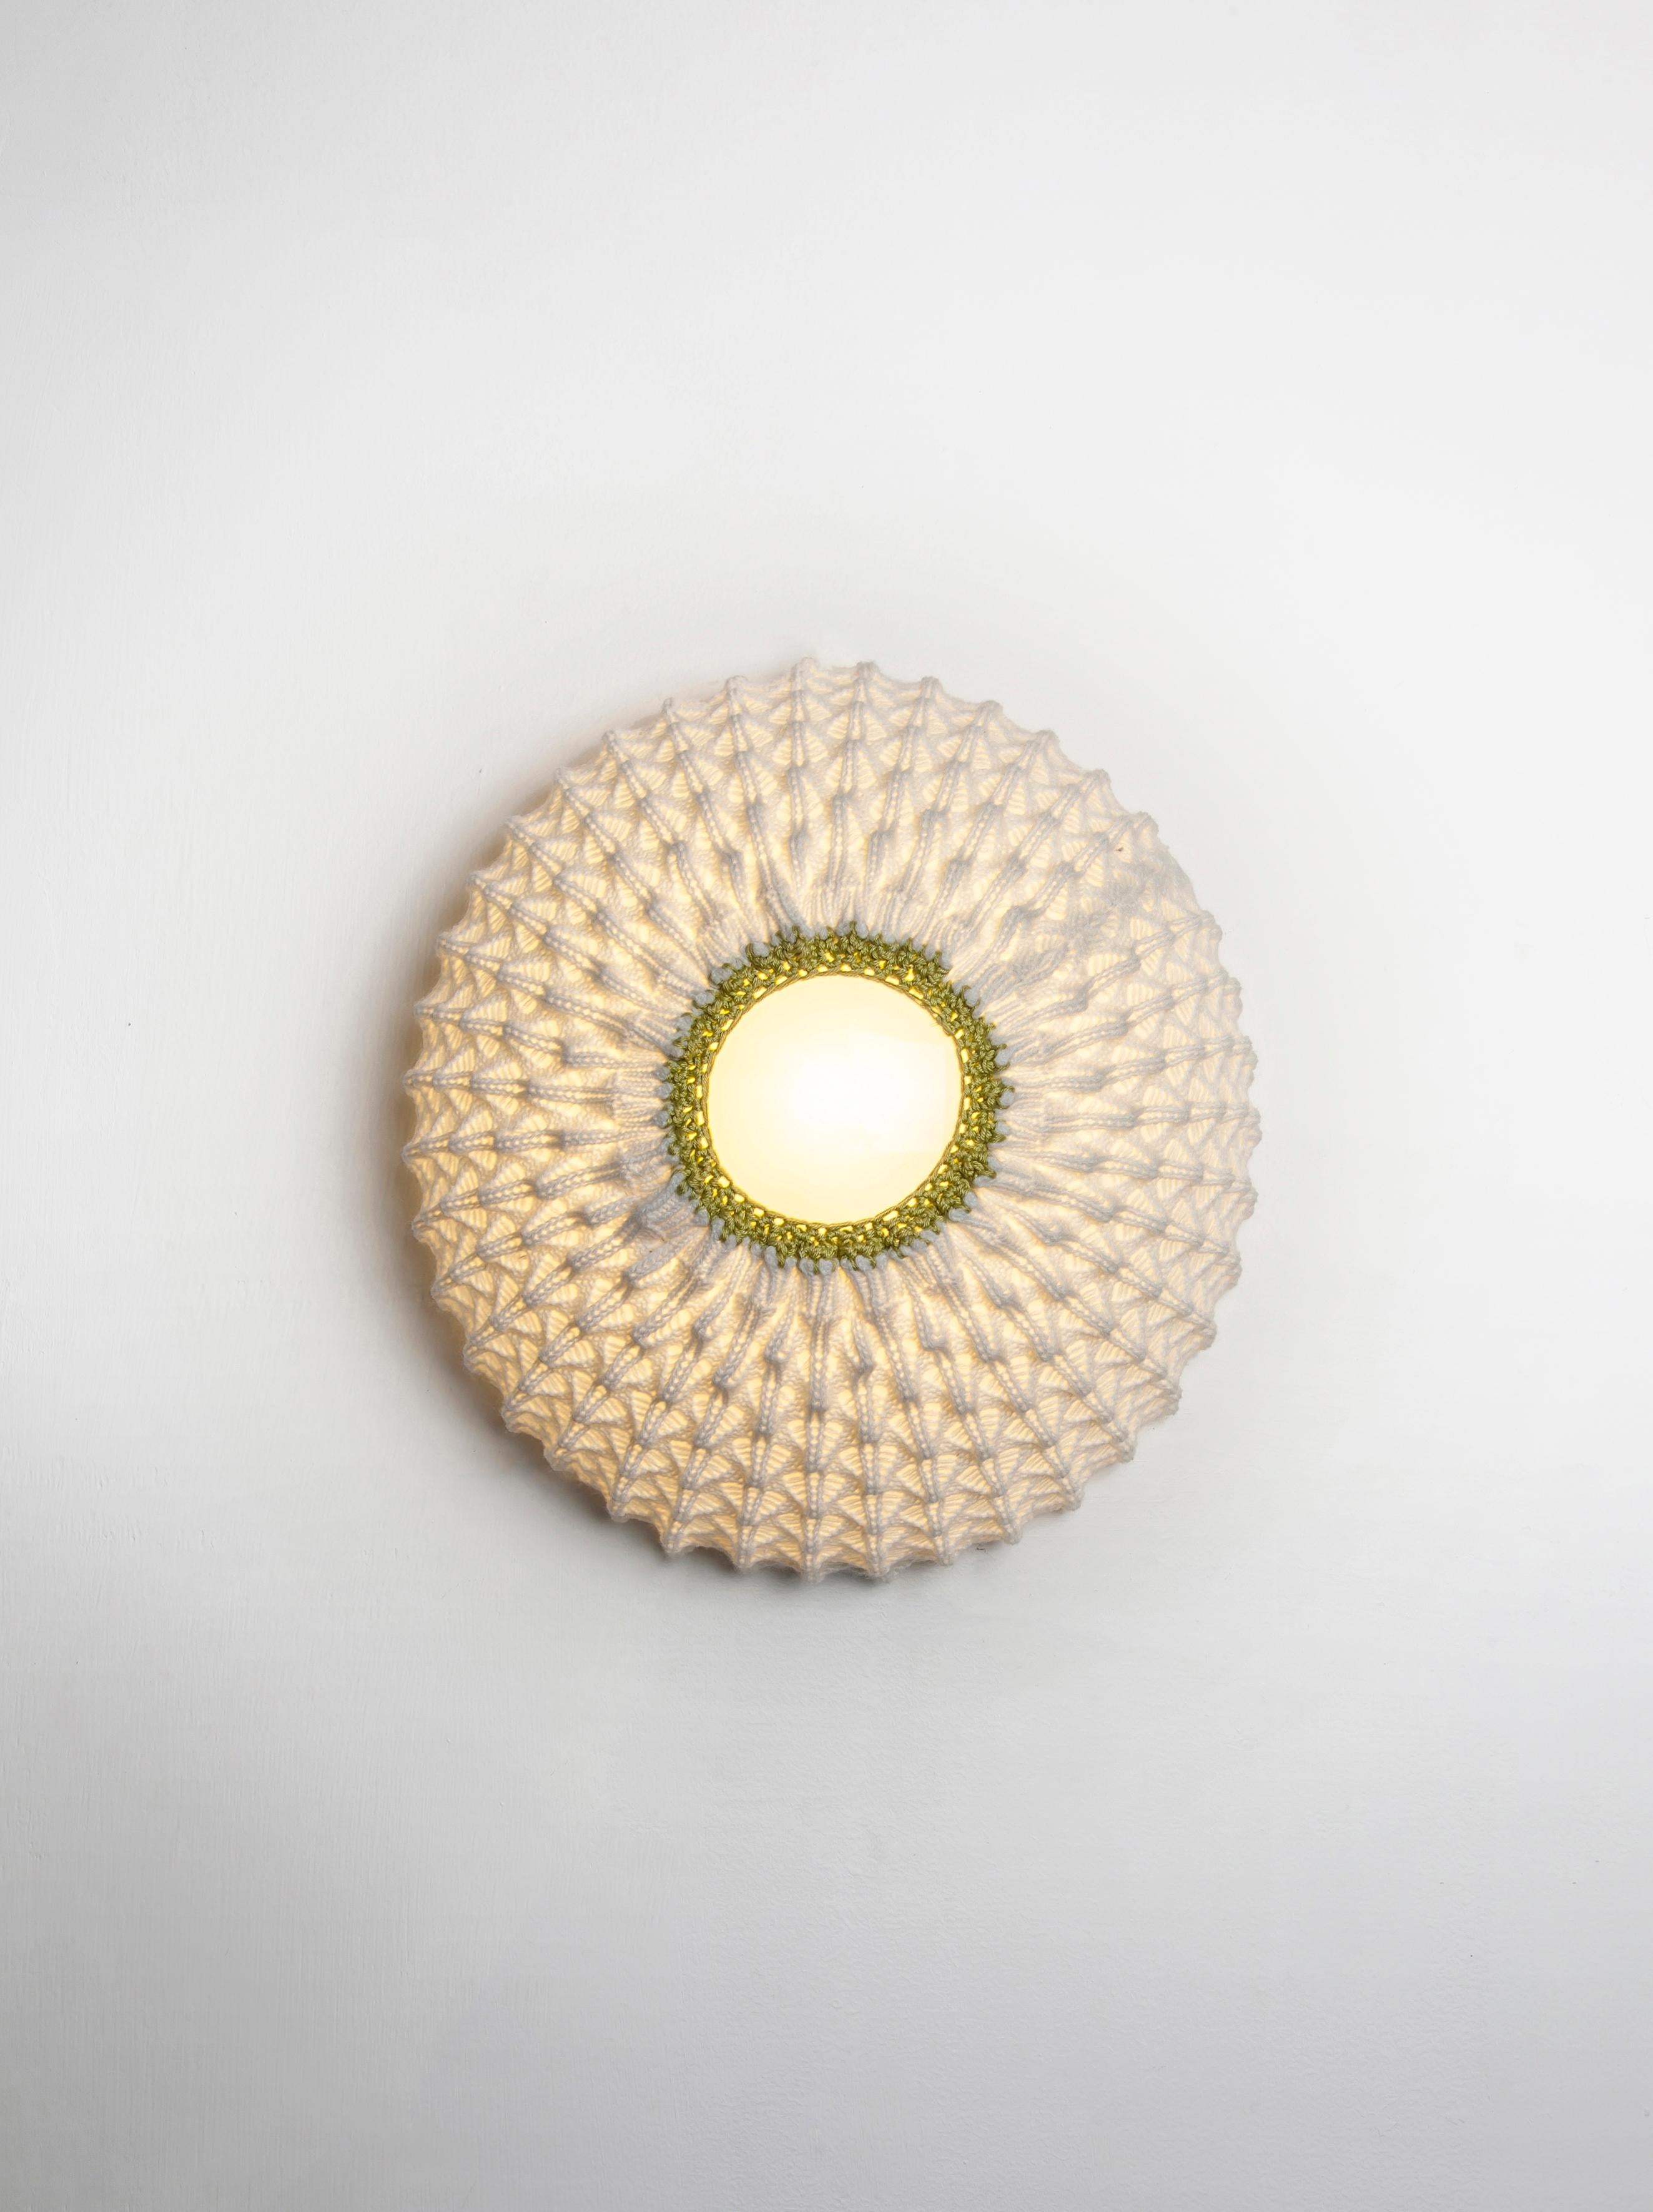 KNITTED wall light - contemporary design -cream color Small size